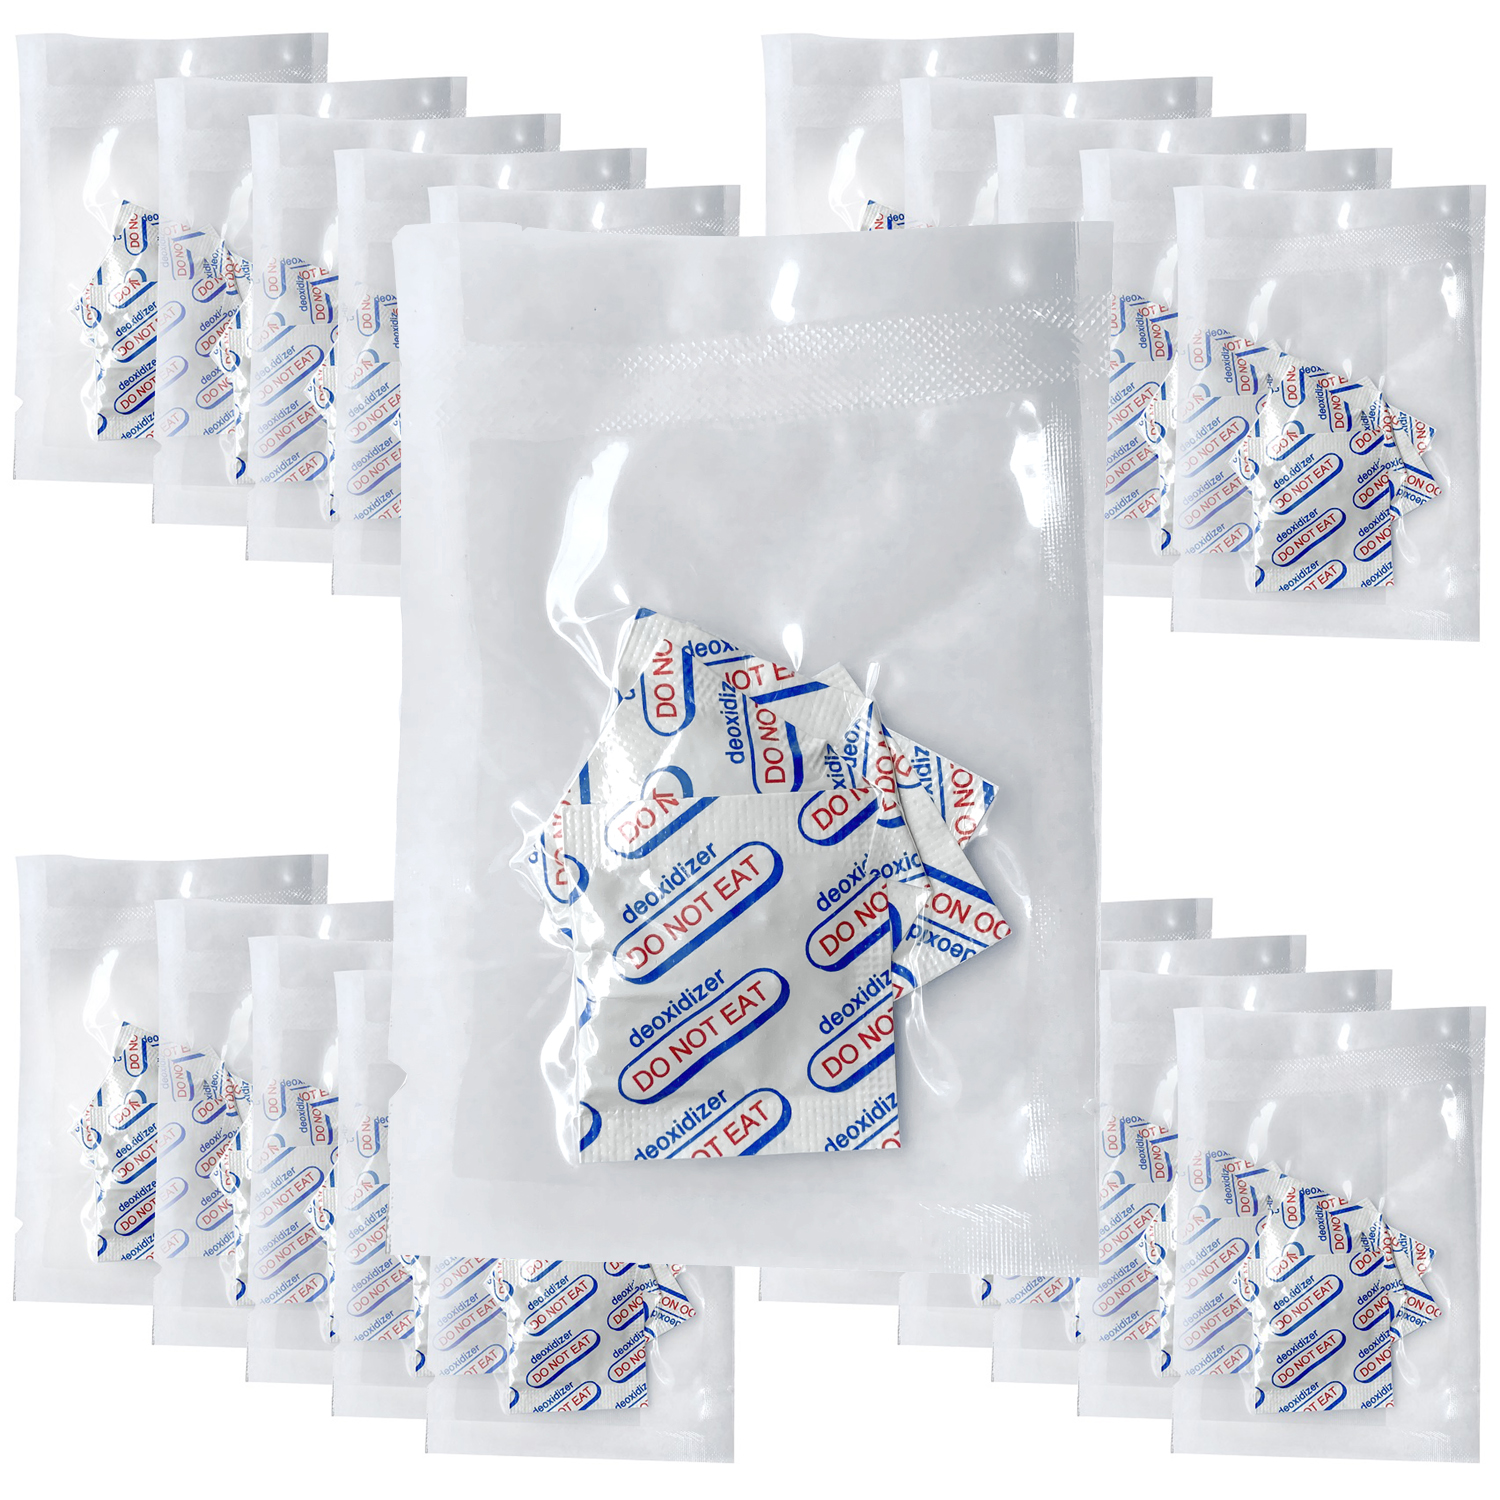 Oxygen Absorber packets in Baby Food, Protein Powder storage